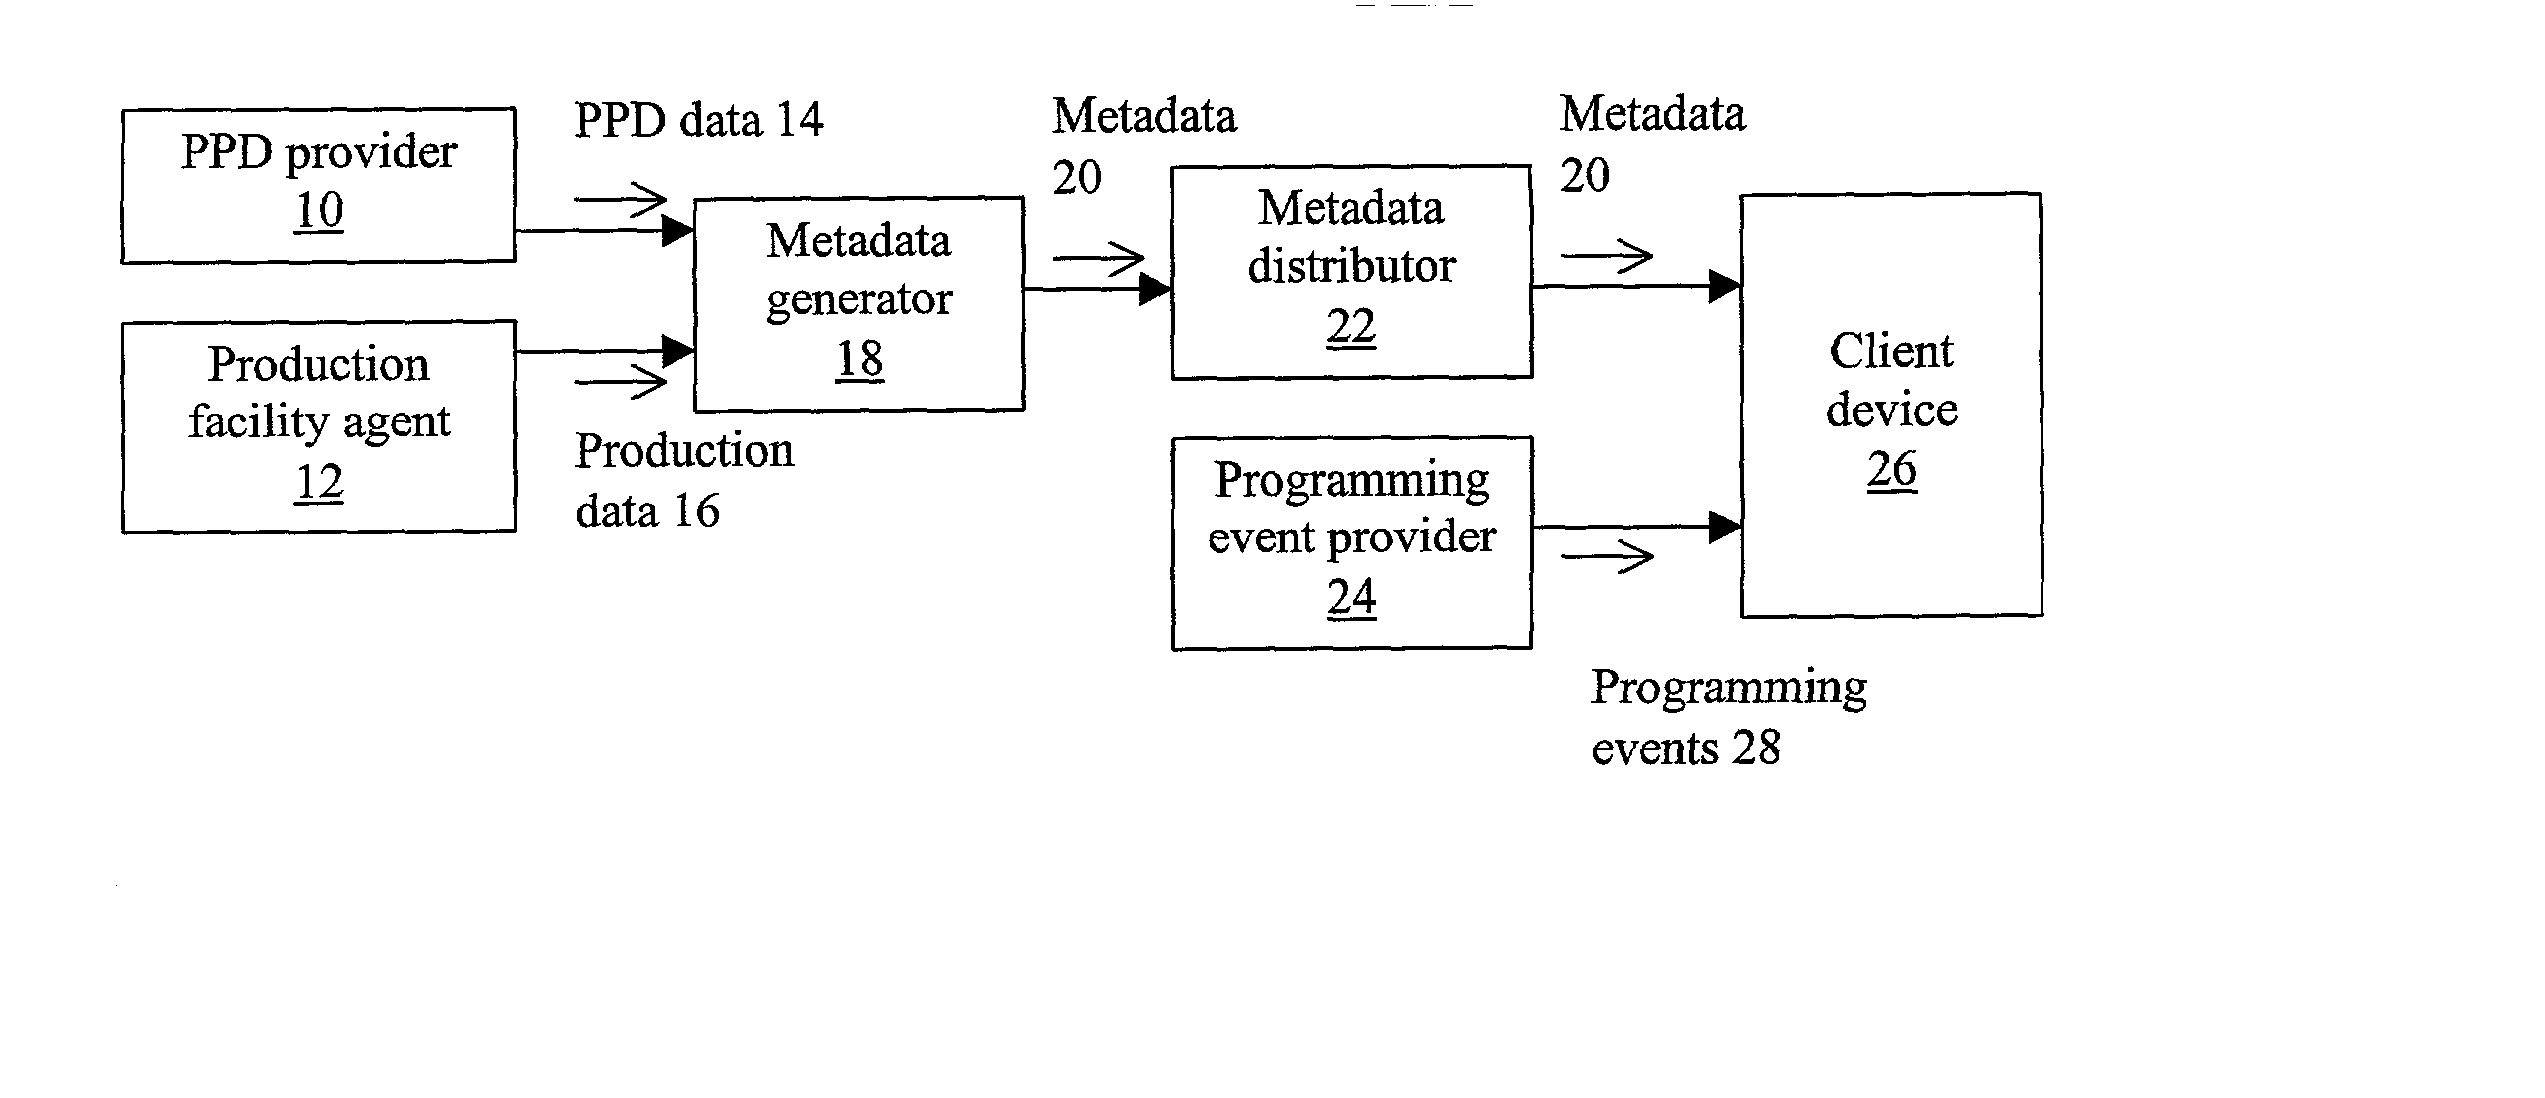 System and method for generating metadata for programming events